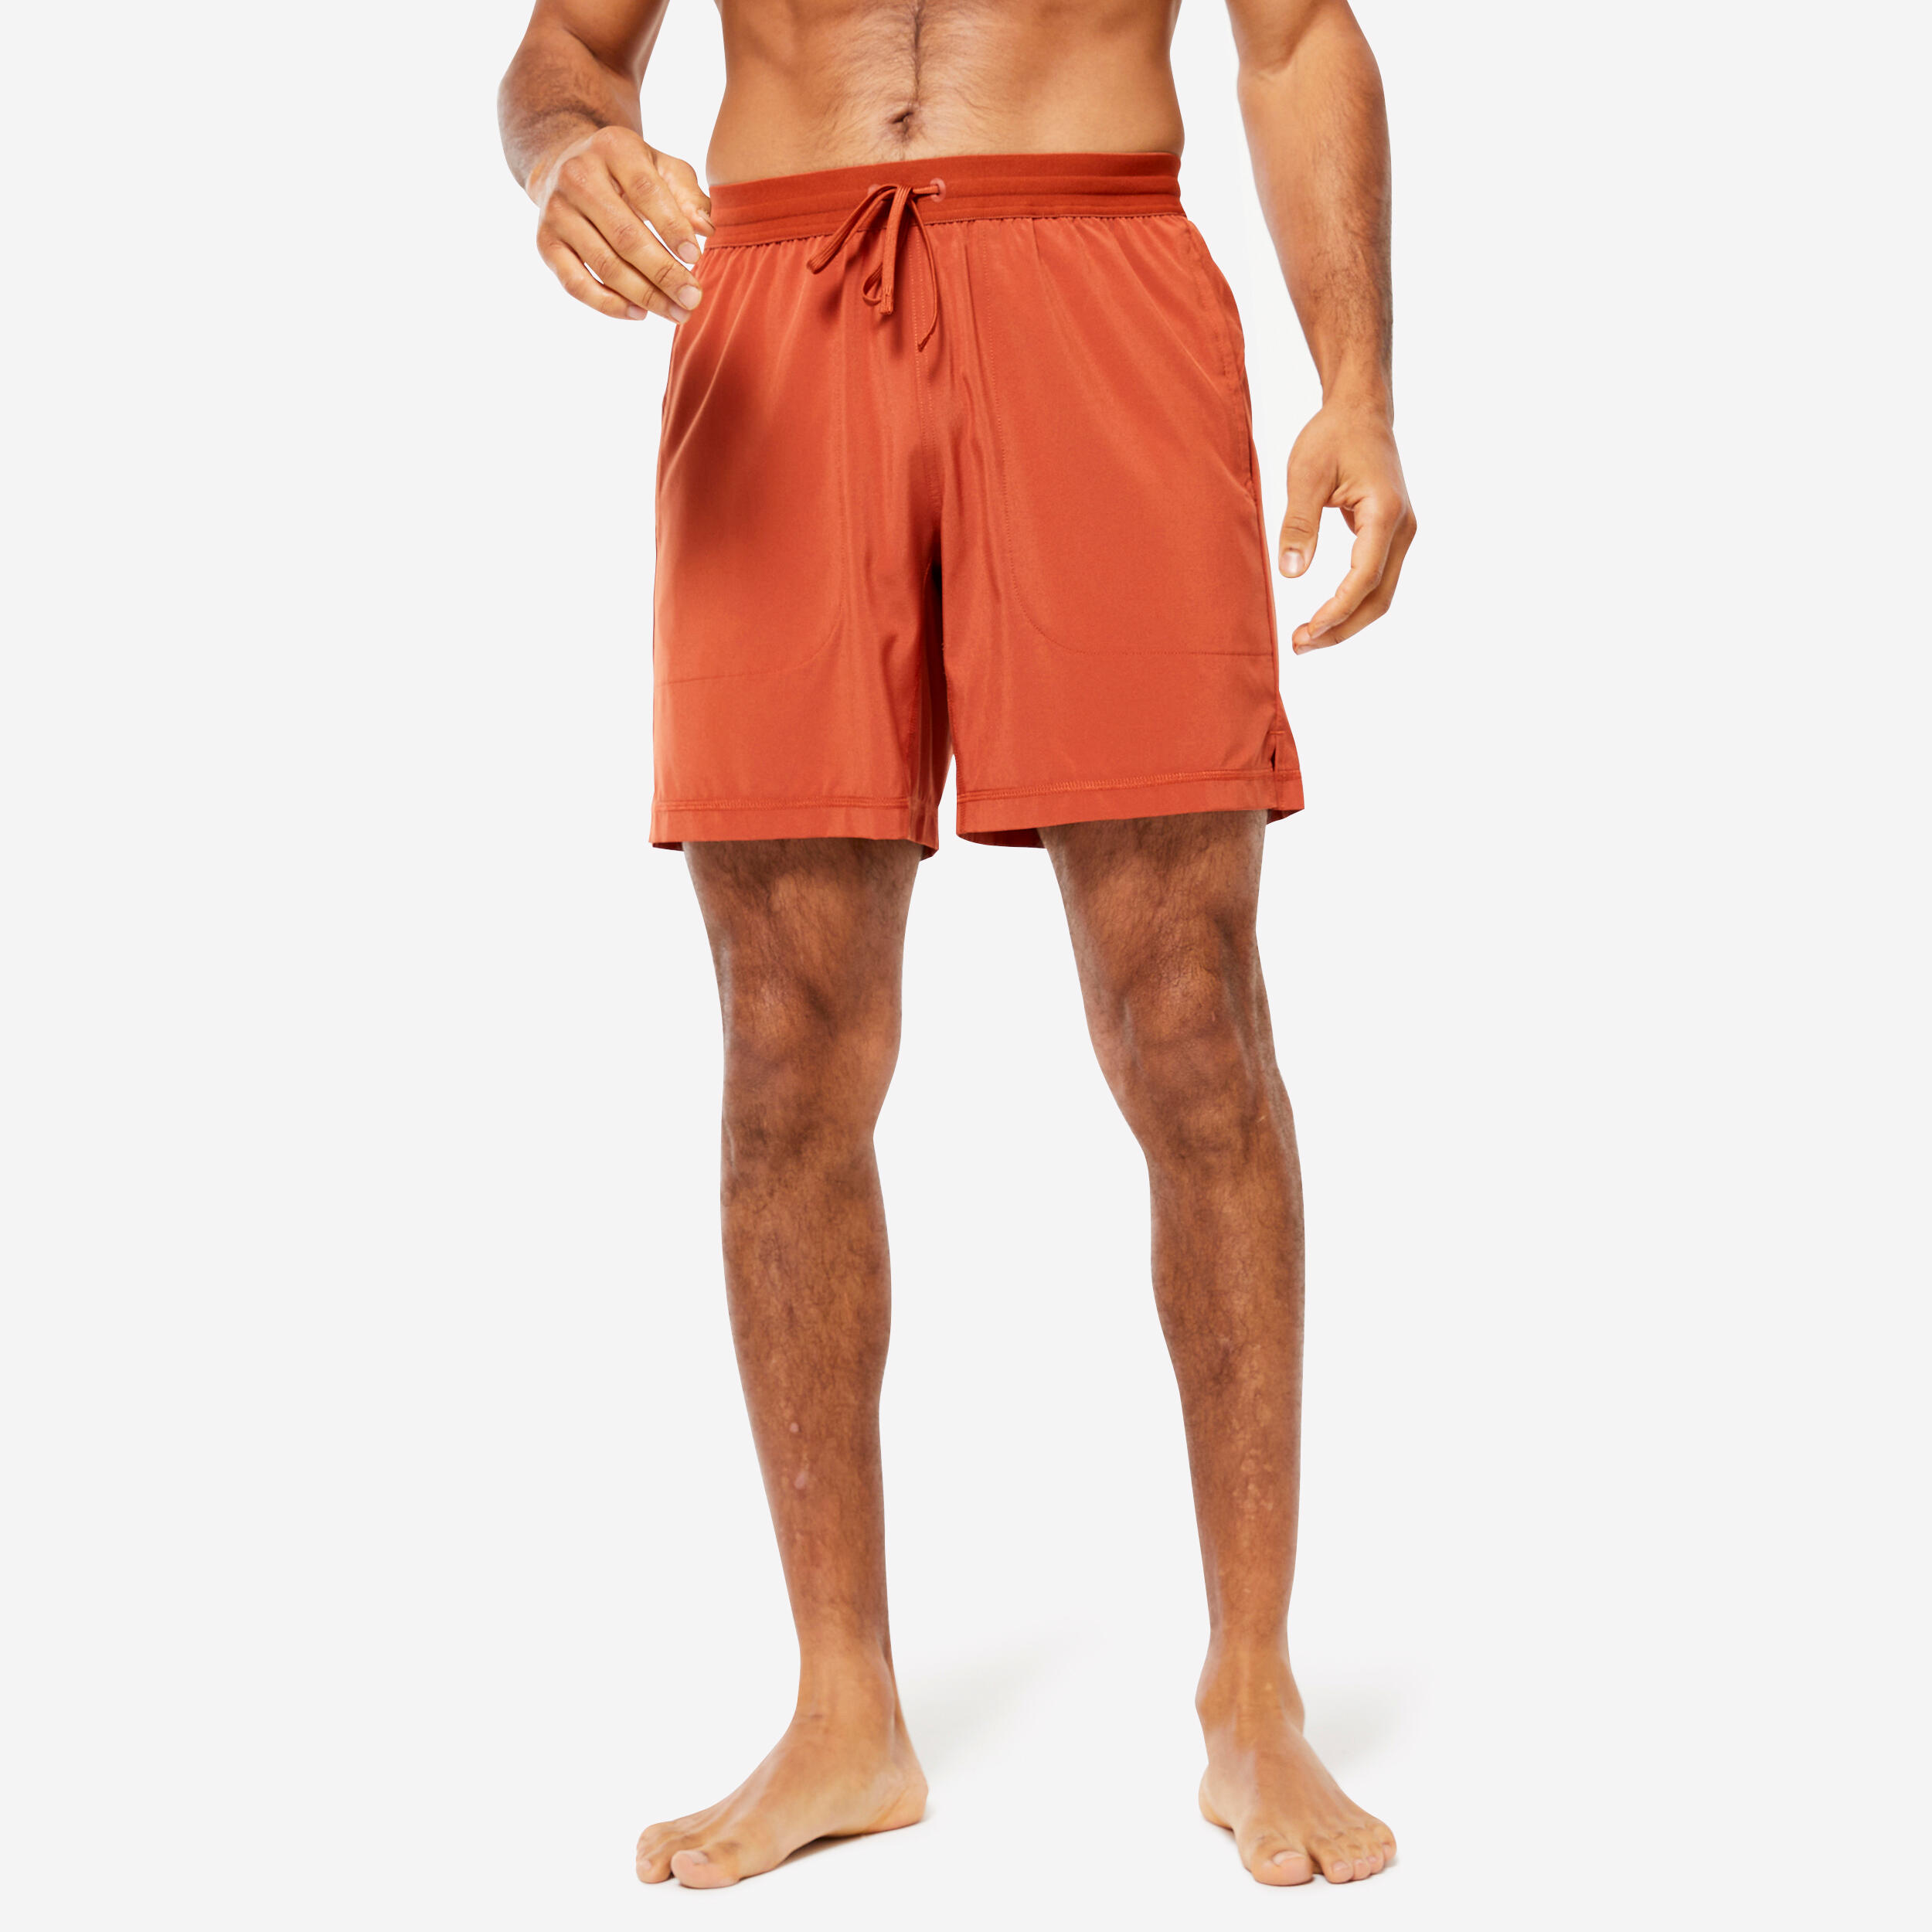 KIMJALY Men's Hot Yoga Ultra-Lightweight Shorts with Built-in Briefs - Sienna